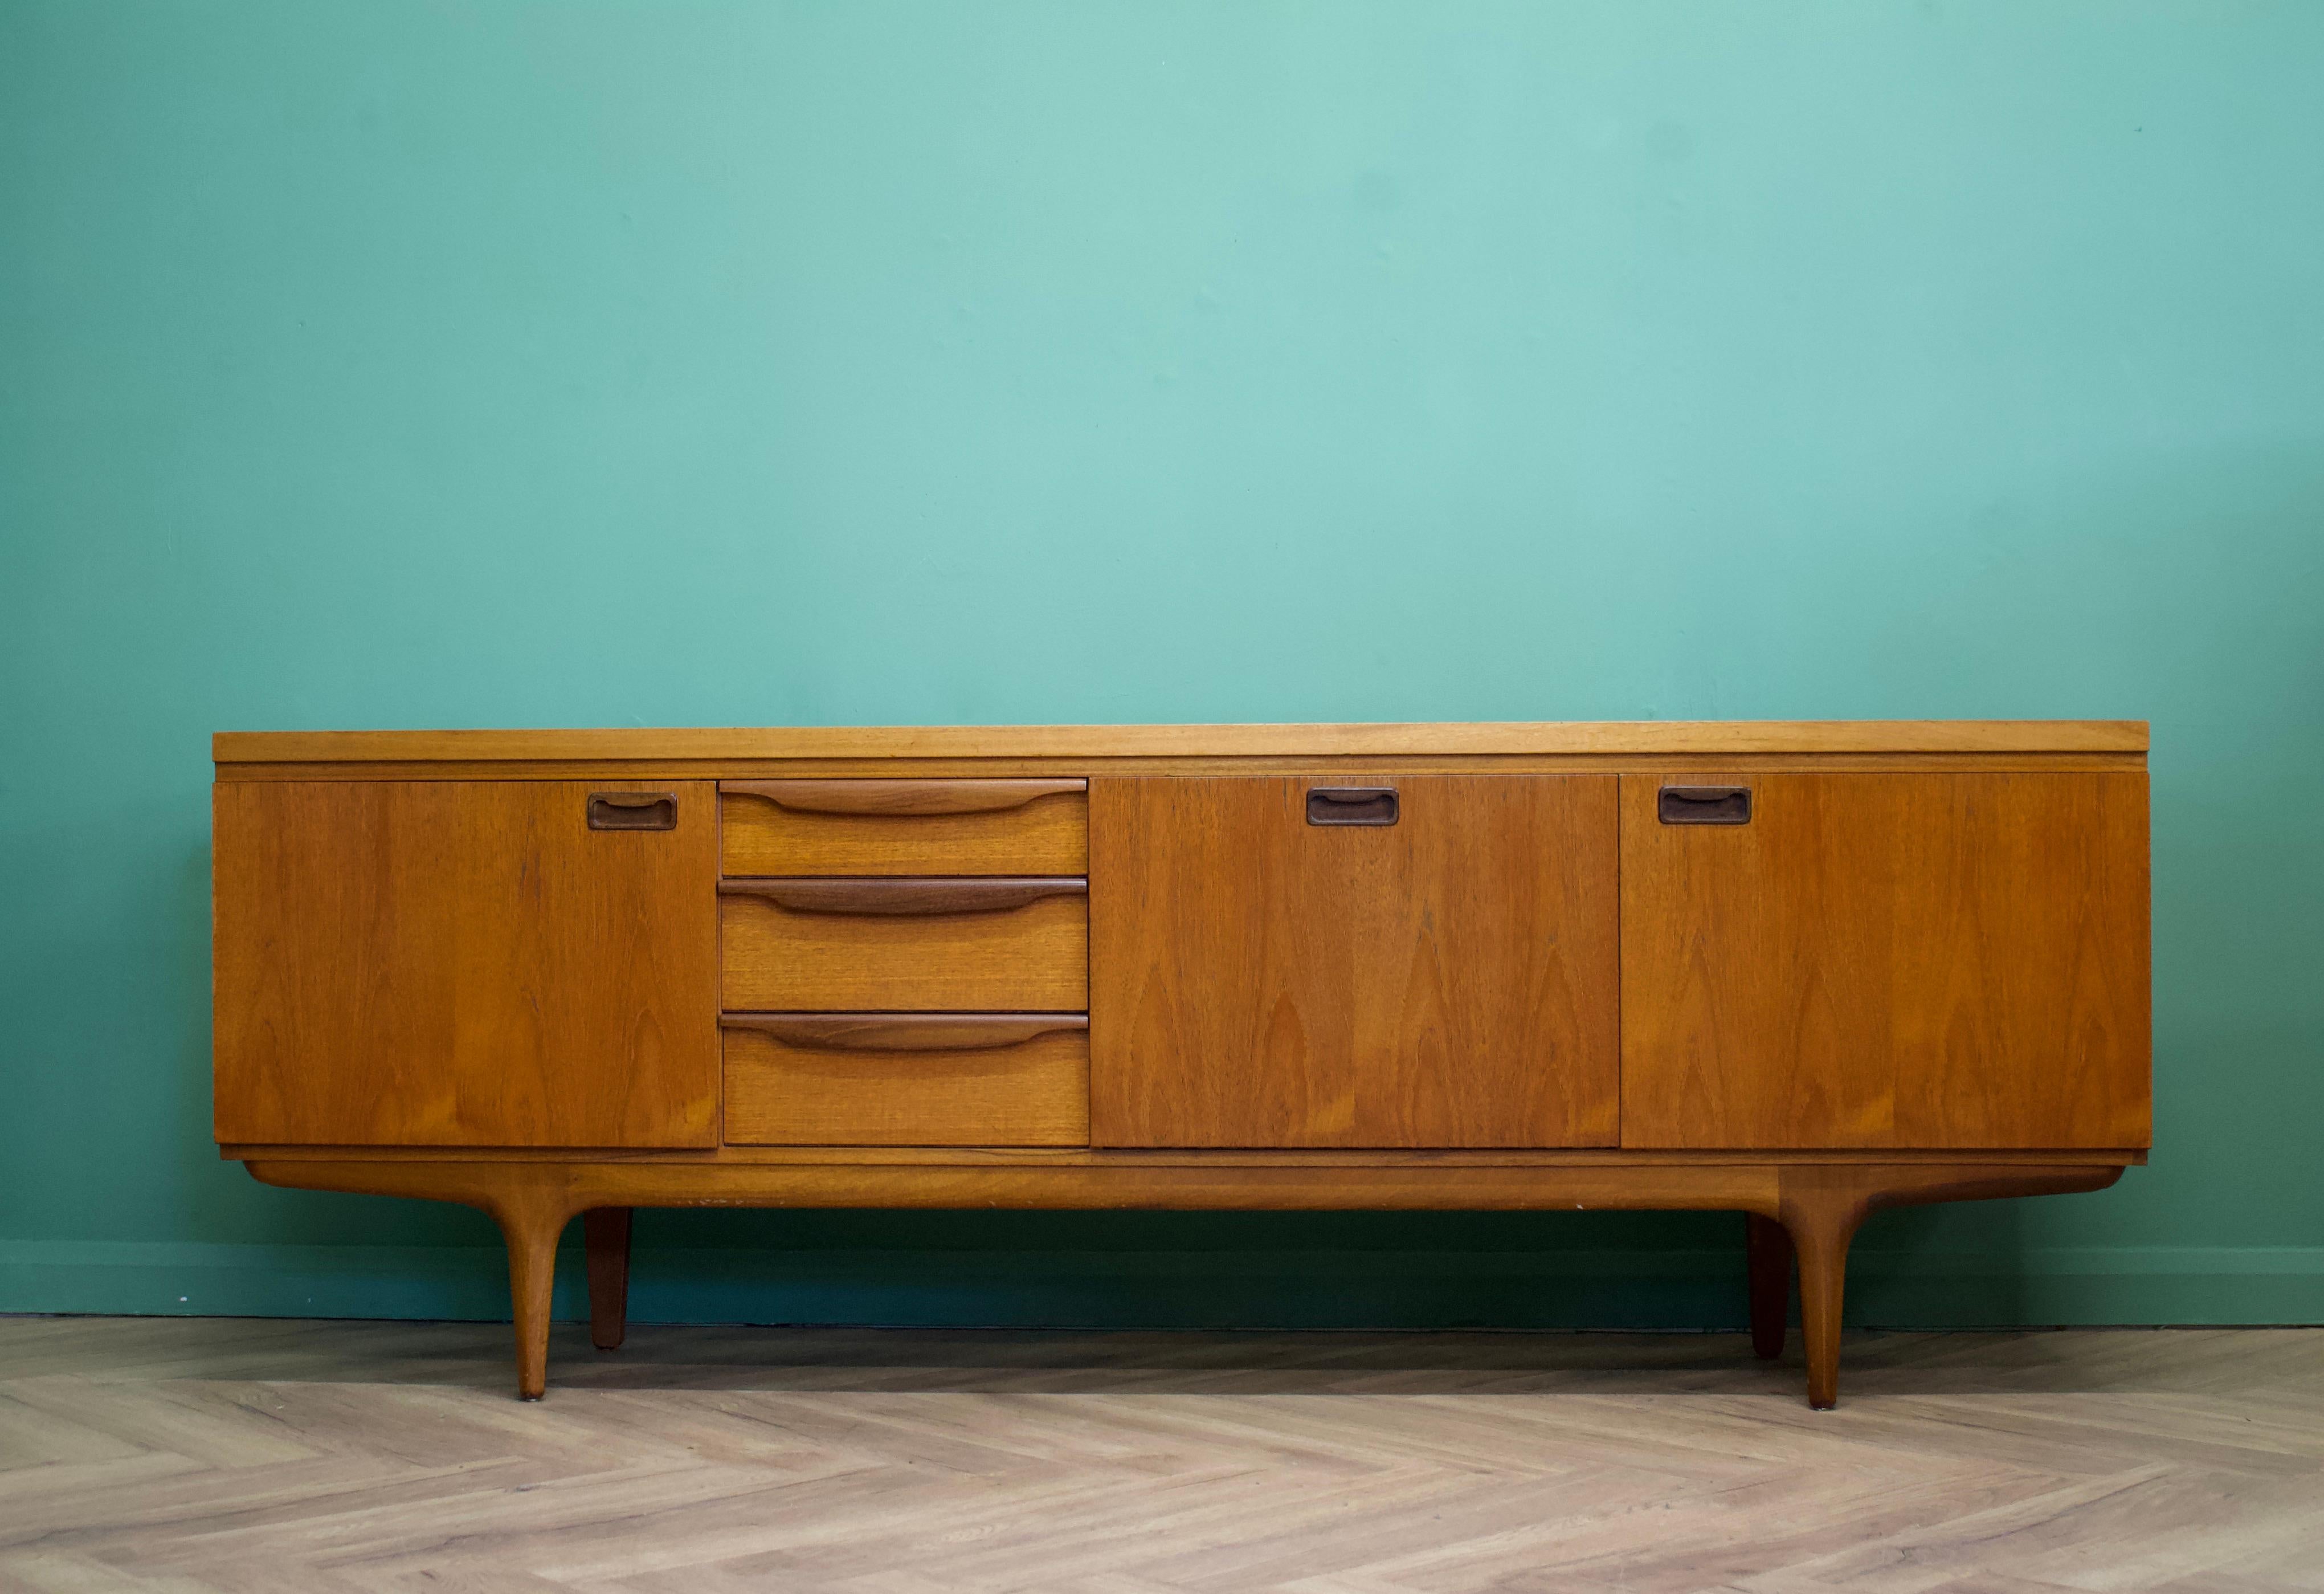 - Mid-Century Modern sideboard
- Features two cupboards, a pull down drinks cabinet and 3 drawers
- There's also a sliding compartment to the drinks cabinet
- Manufactured by Greaves & Thomas in the UK
- Made from teak and teak veneer.